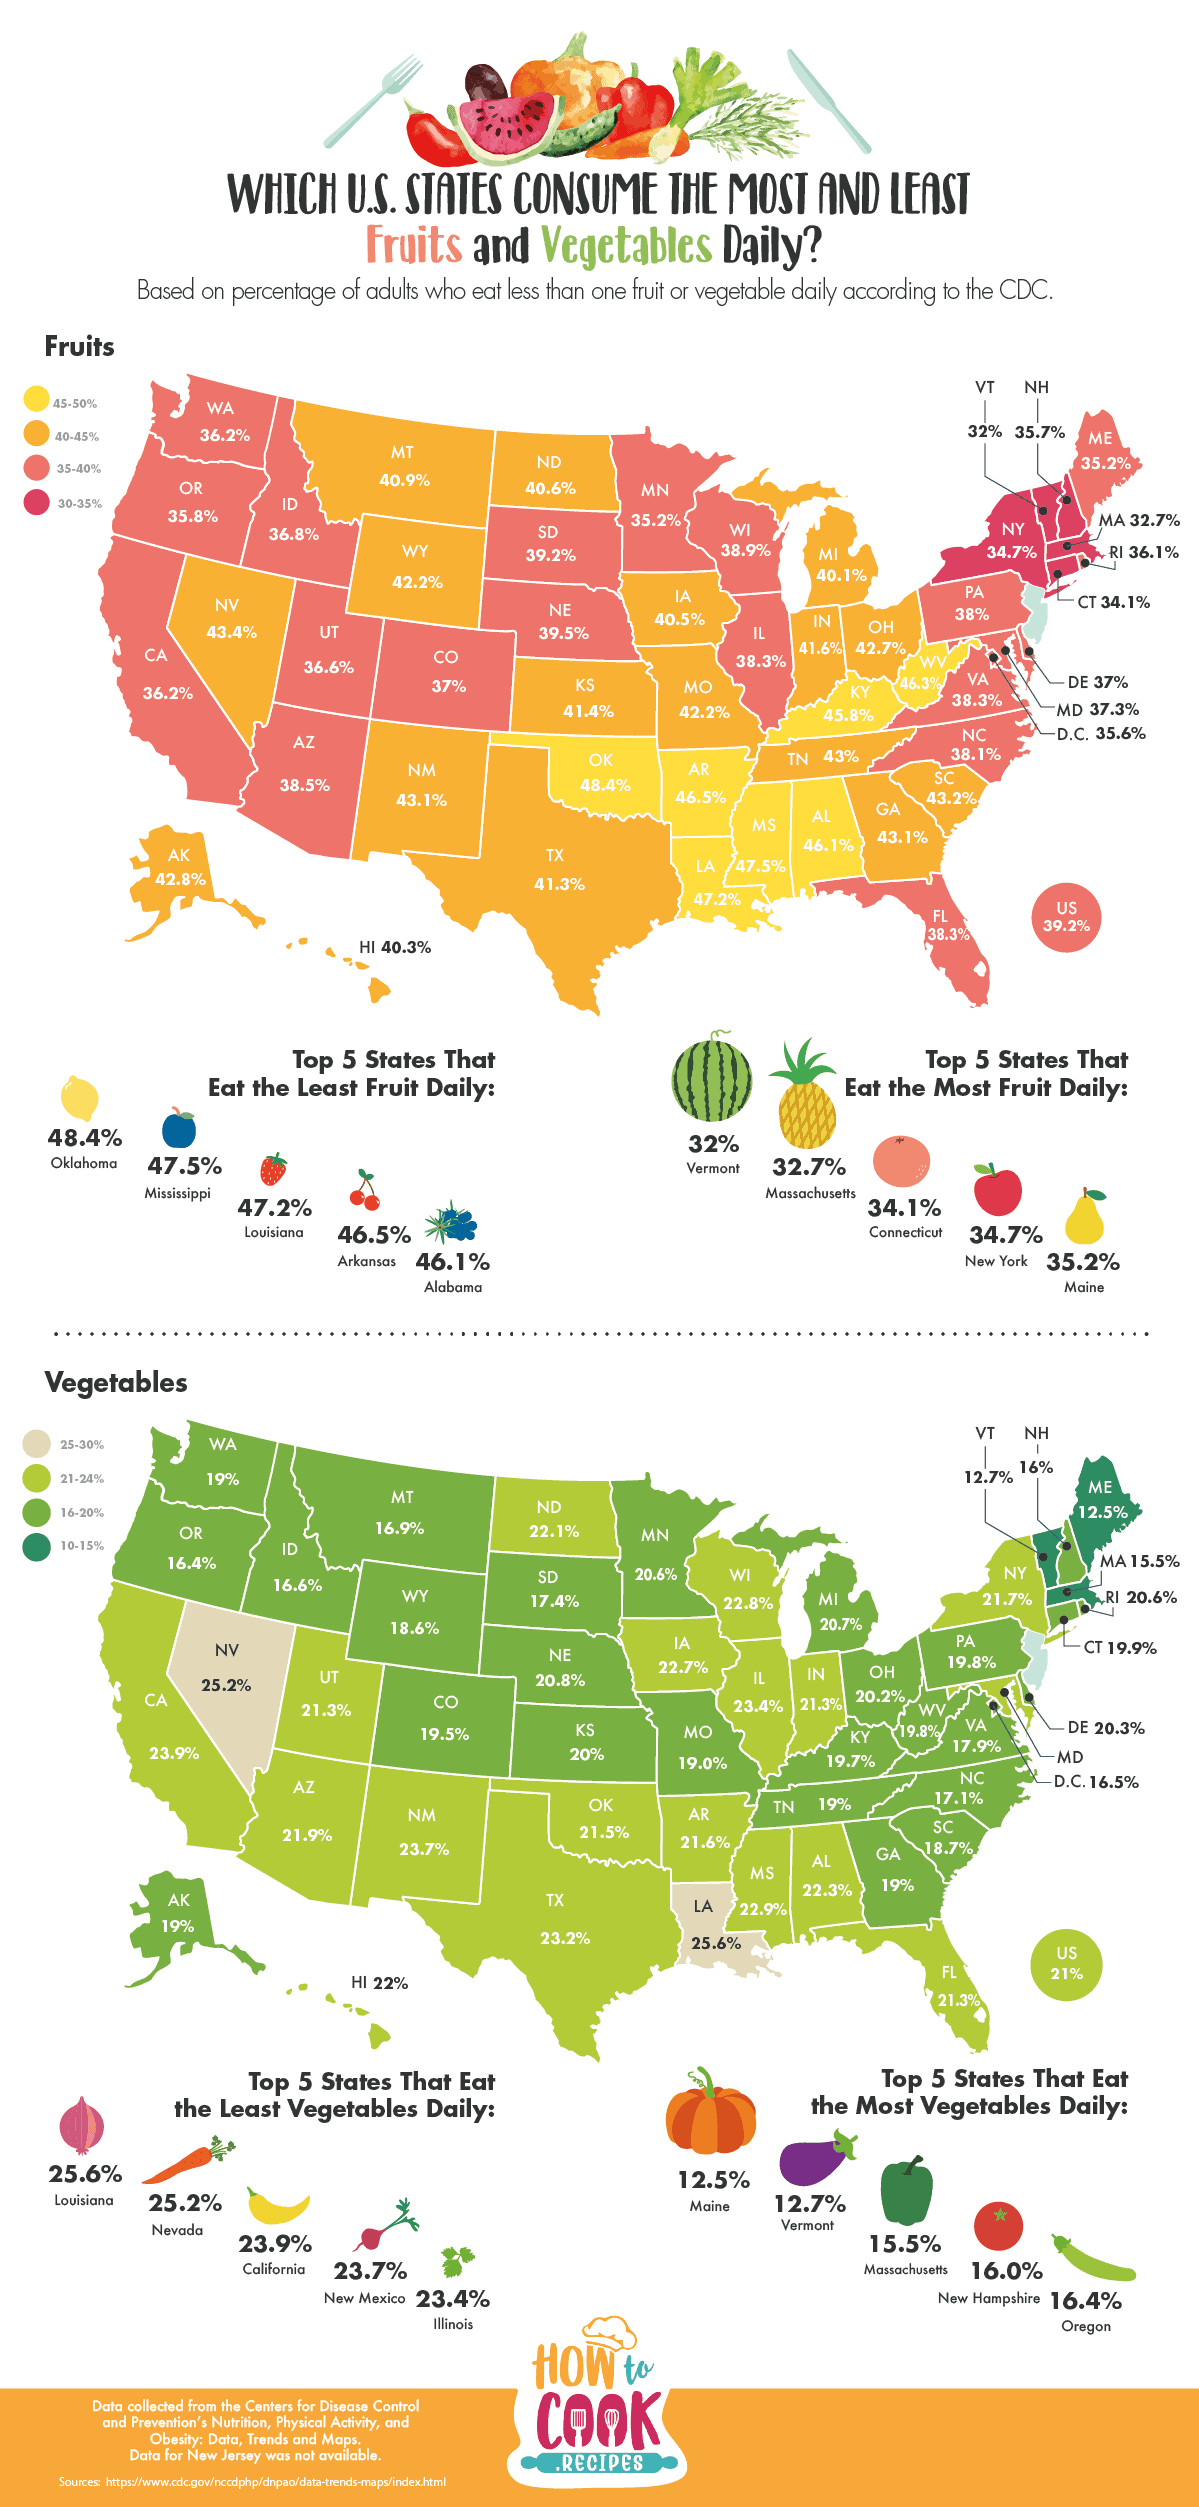 Which States Consume the Most and Least Fruits and Vegetables in the United States